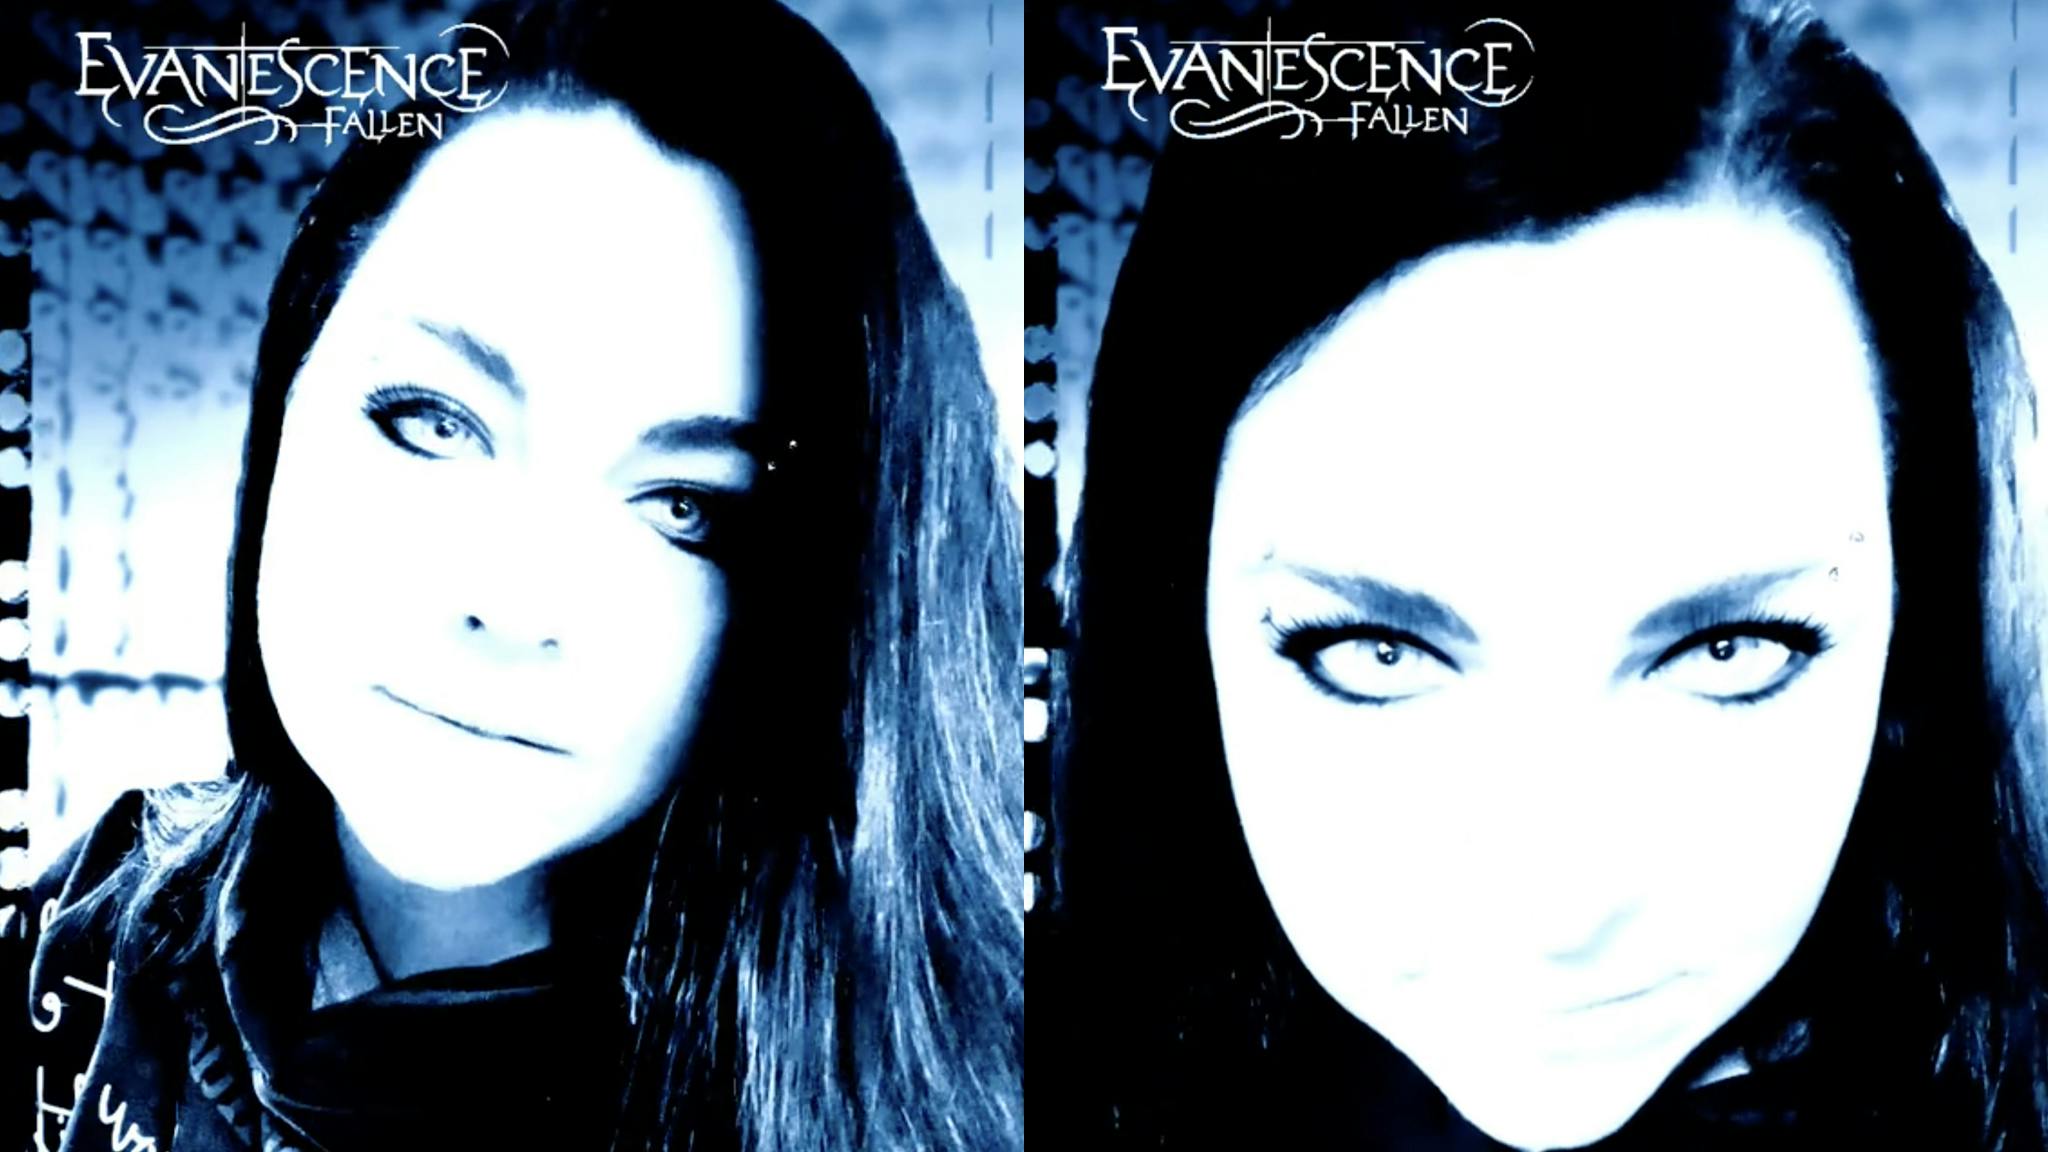 Evanescence release Fallen TikTok filter as part of 20th anniversary celebrations